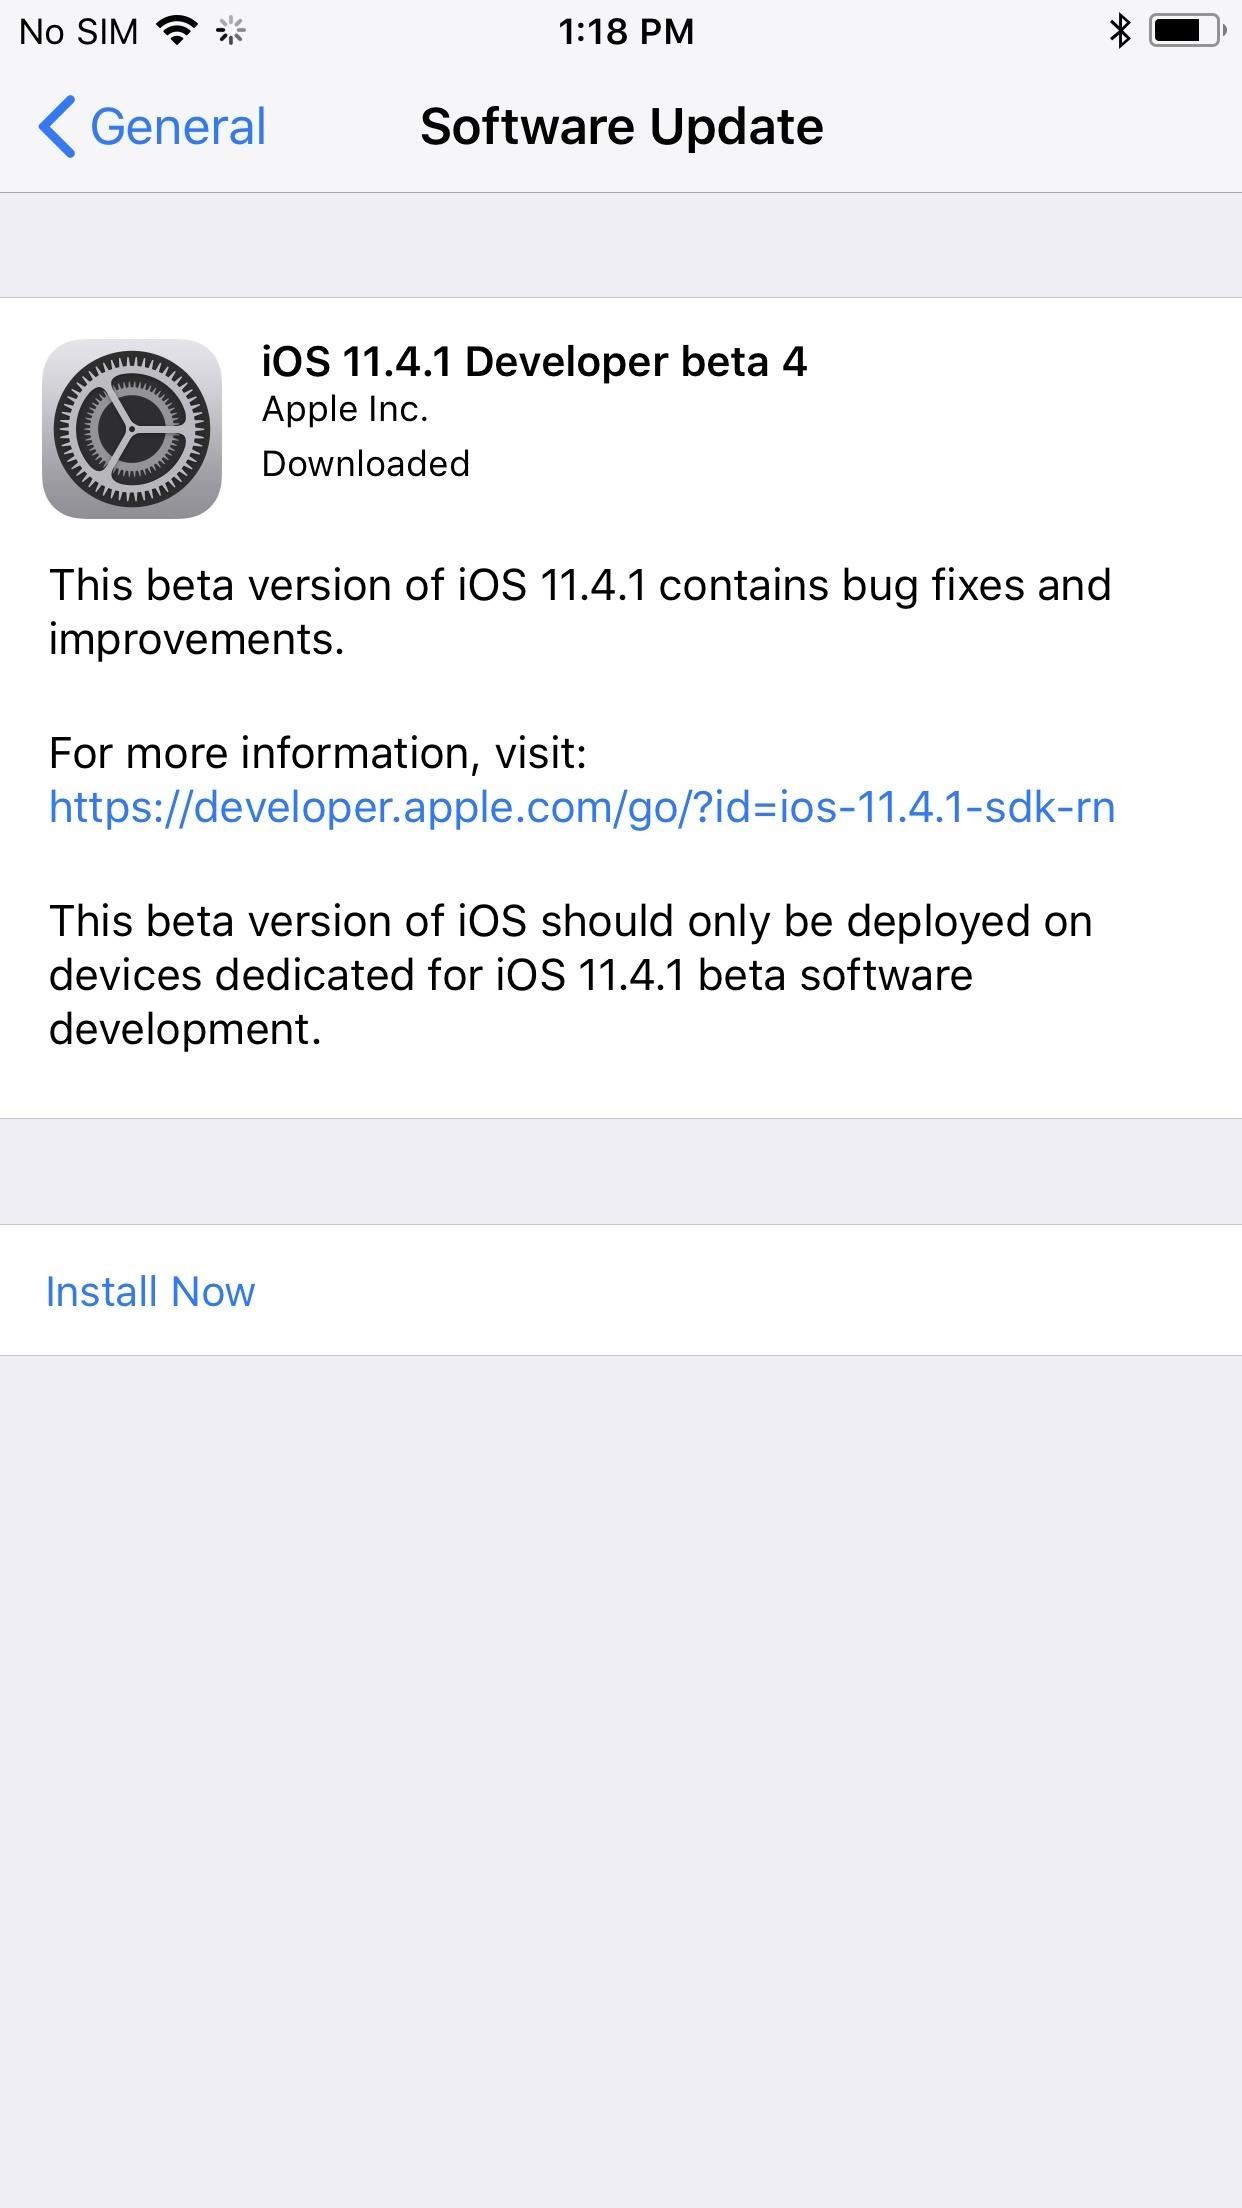 iOS 11.4.1 Beta 4 Released for iPhones, Includes Only 'Bug Fixes' & Unknown Improvements